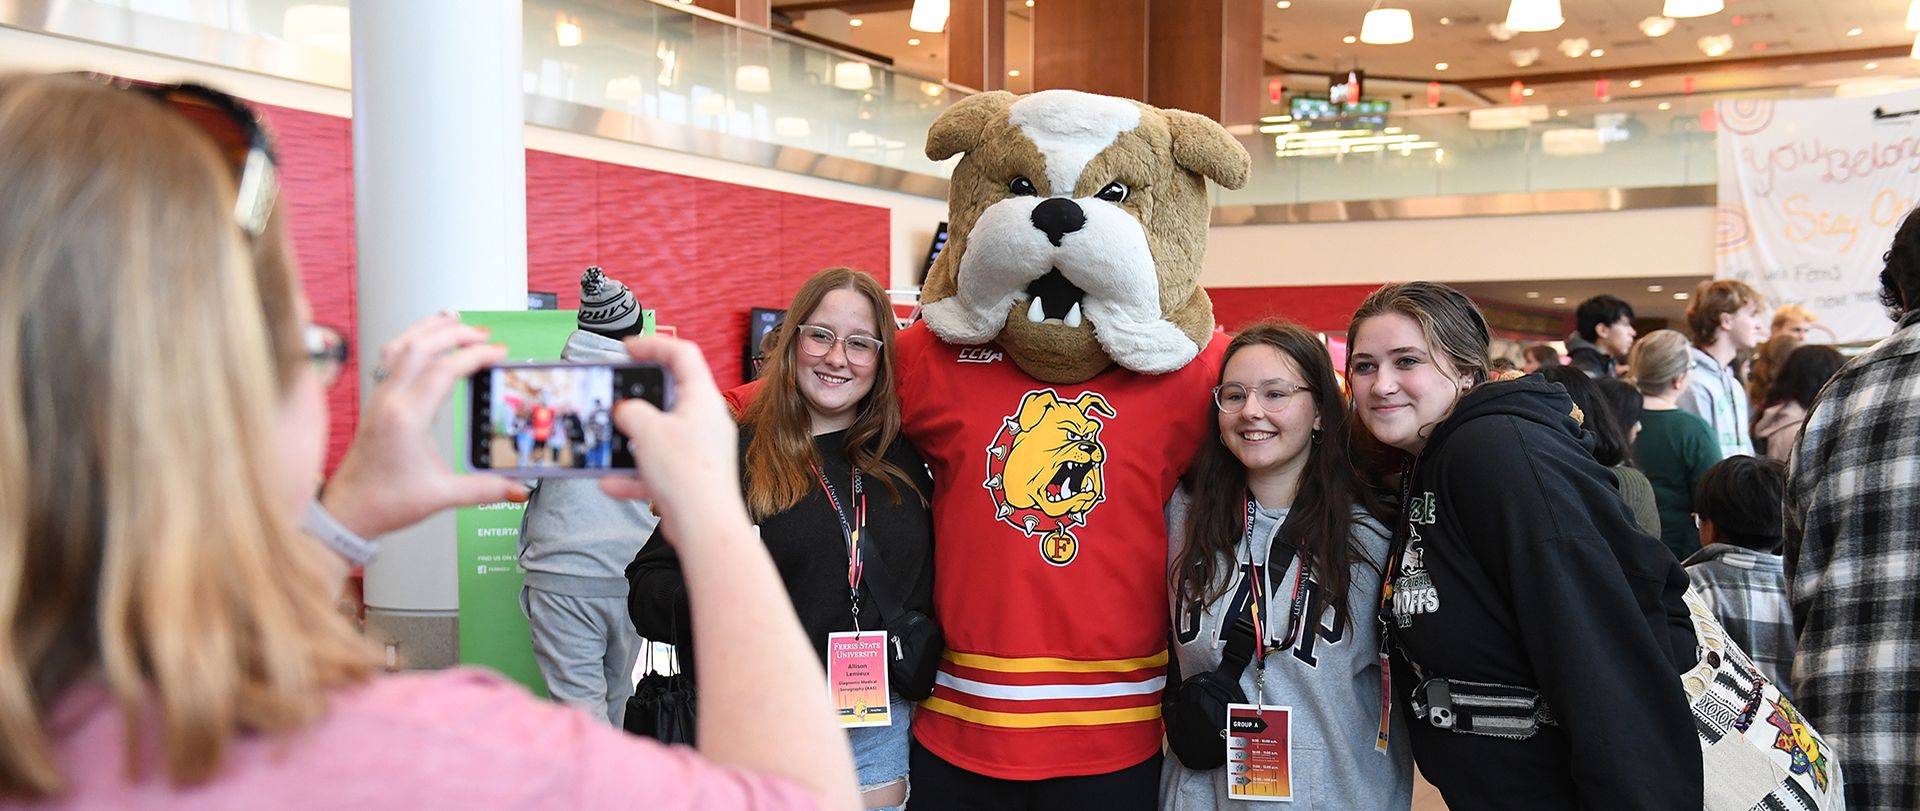 Spring Dawg Days Event April 13 to Capsulize Ferris State Experience for Prospective Students